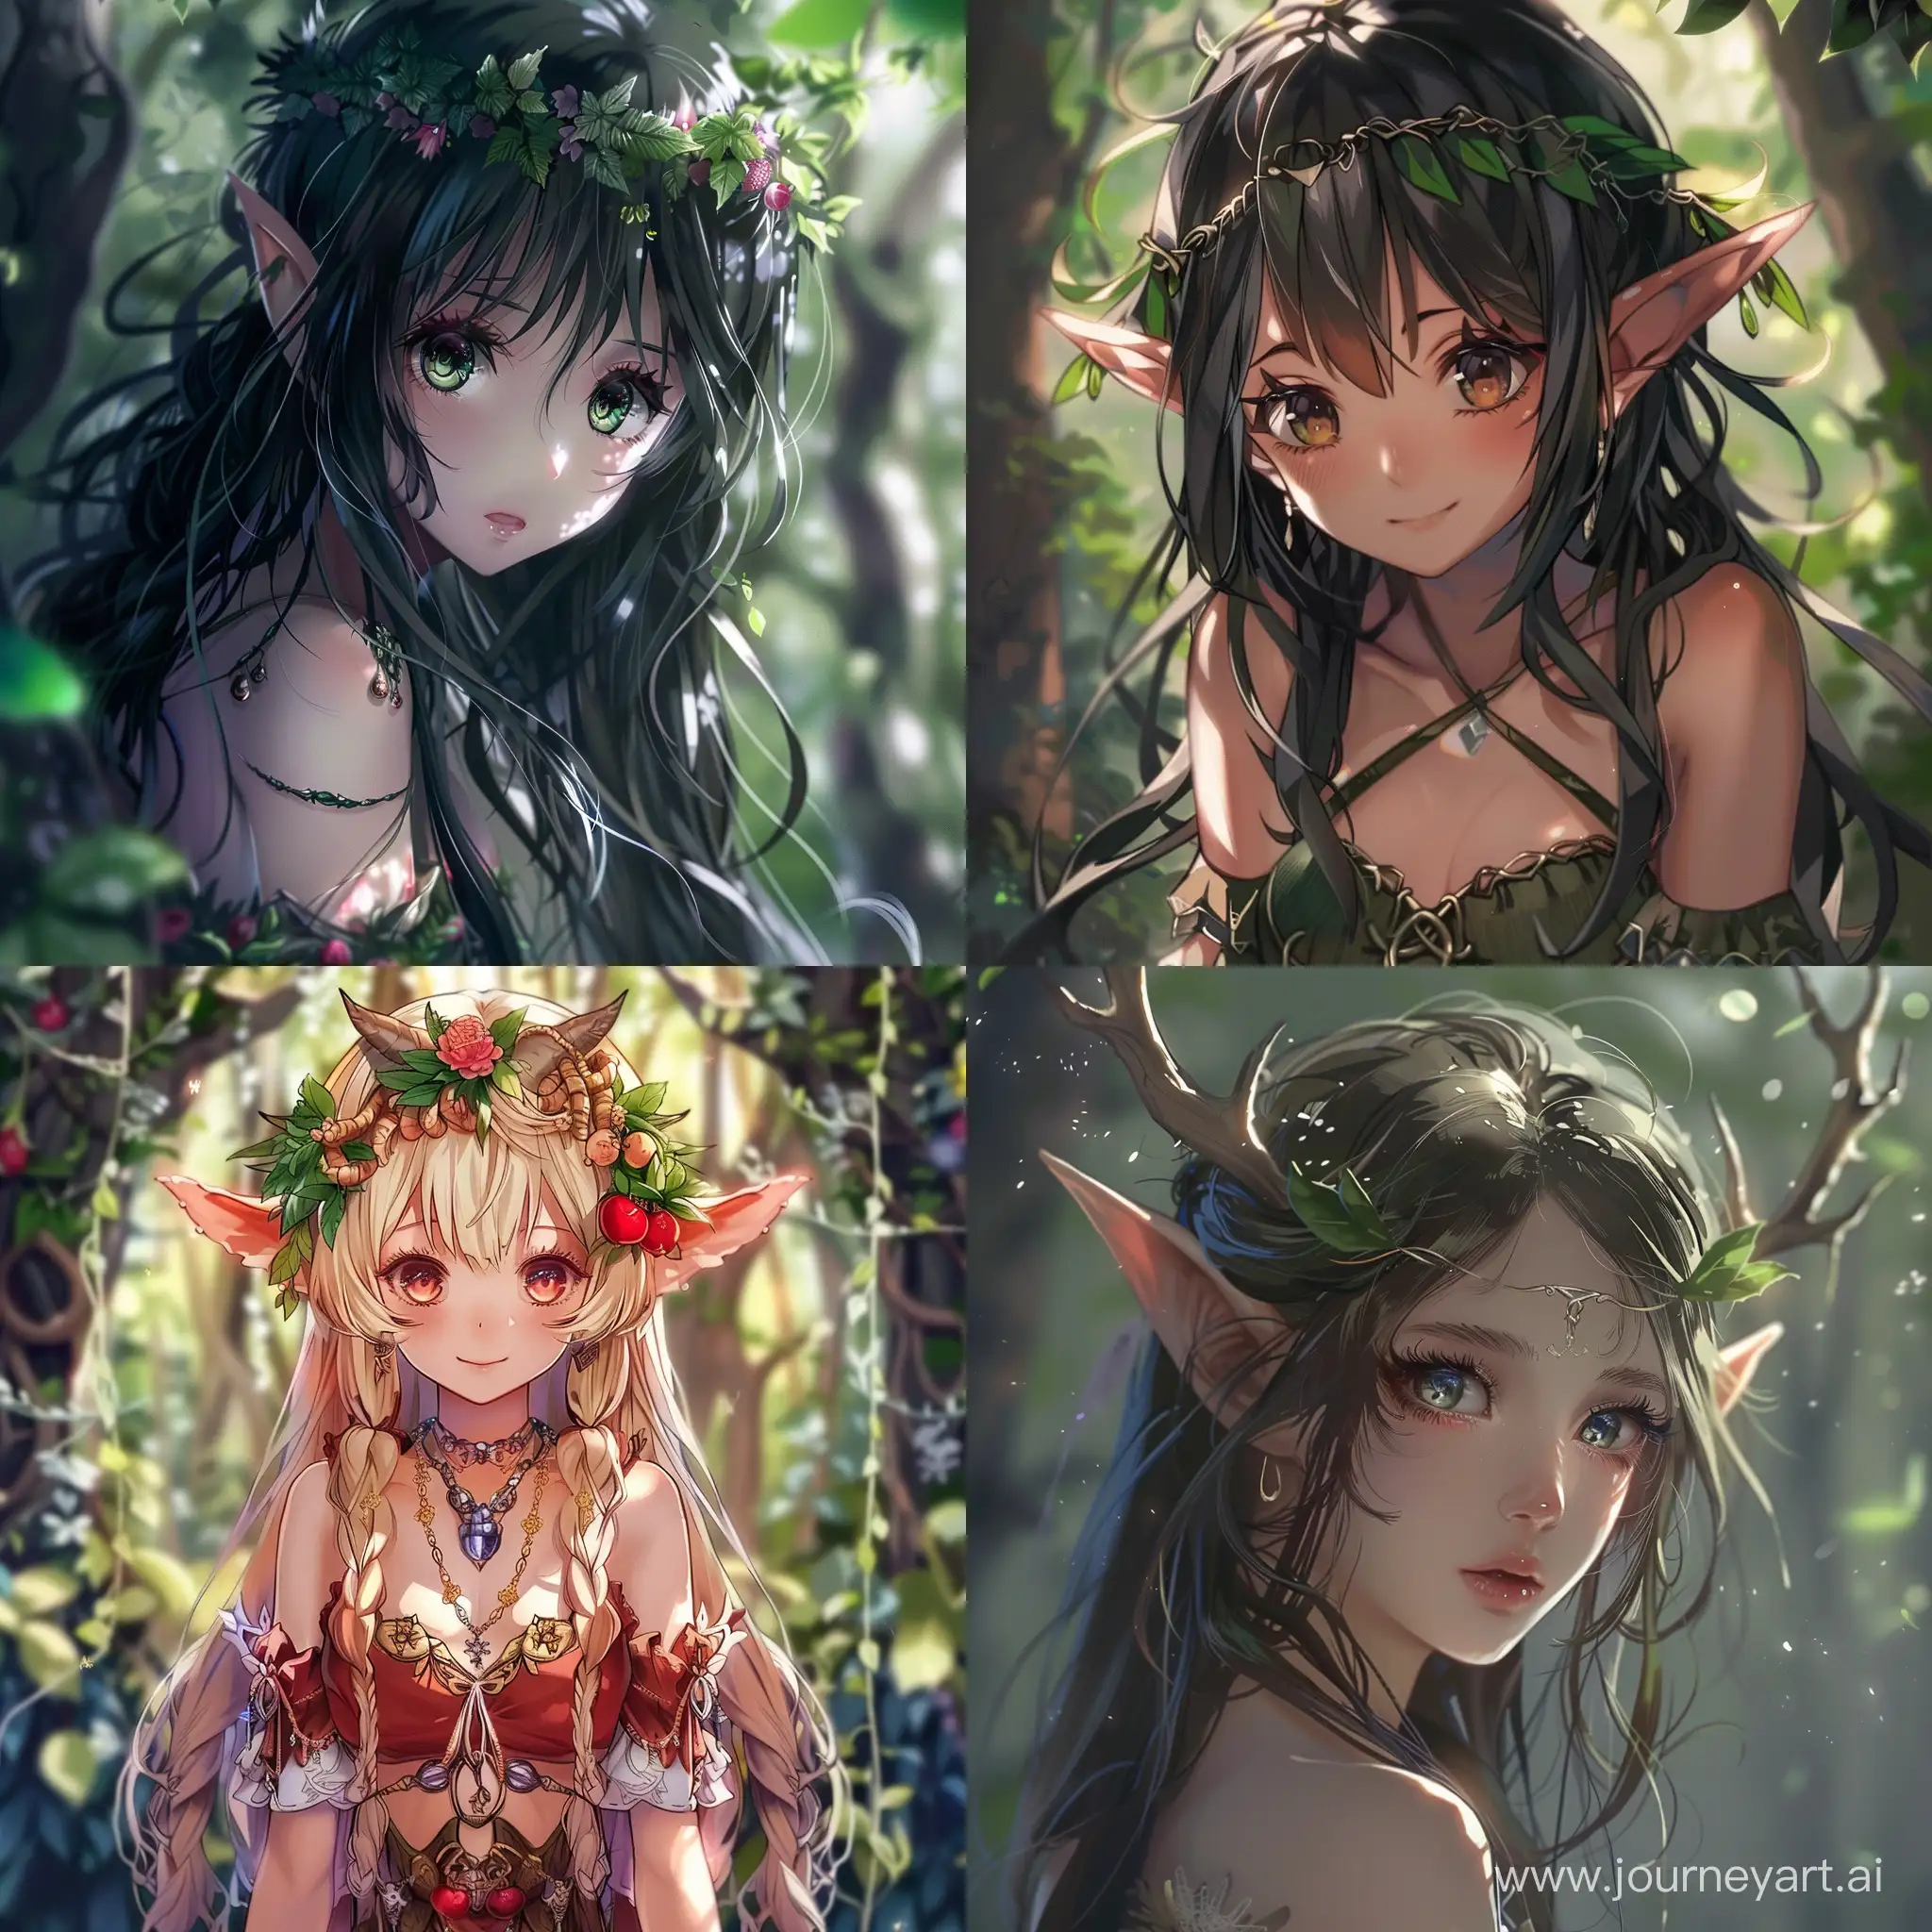 Enchanting-Anime-Elf-Girl-with-Unique-Features